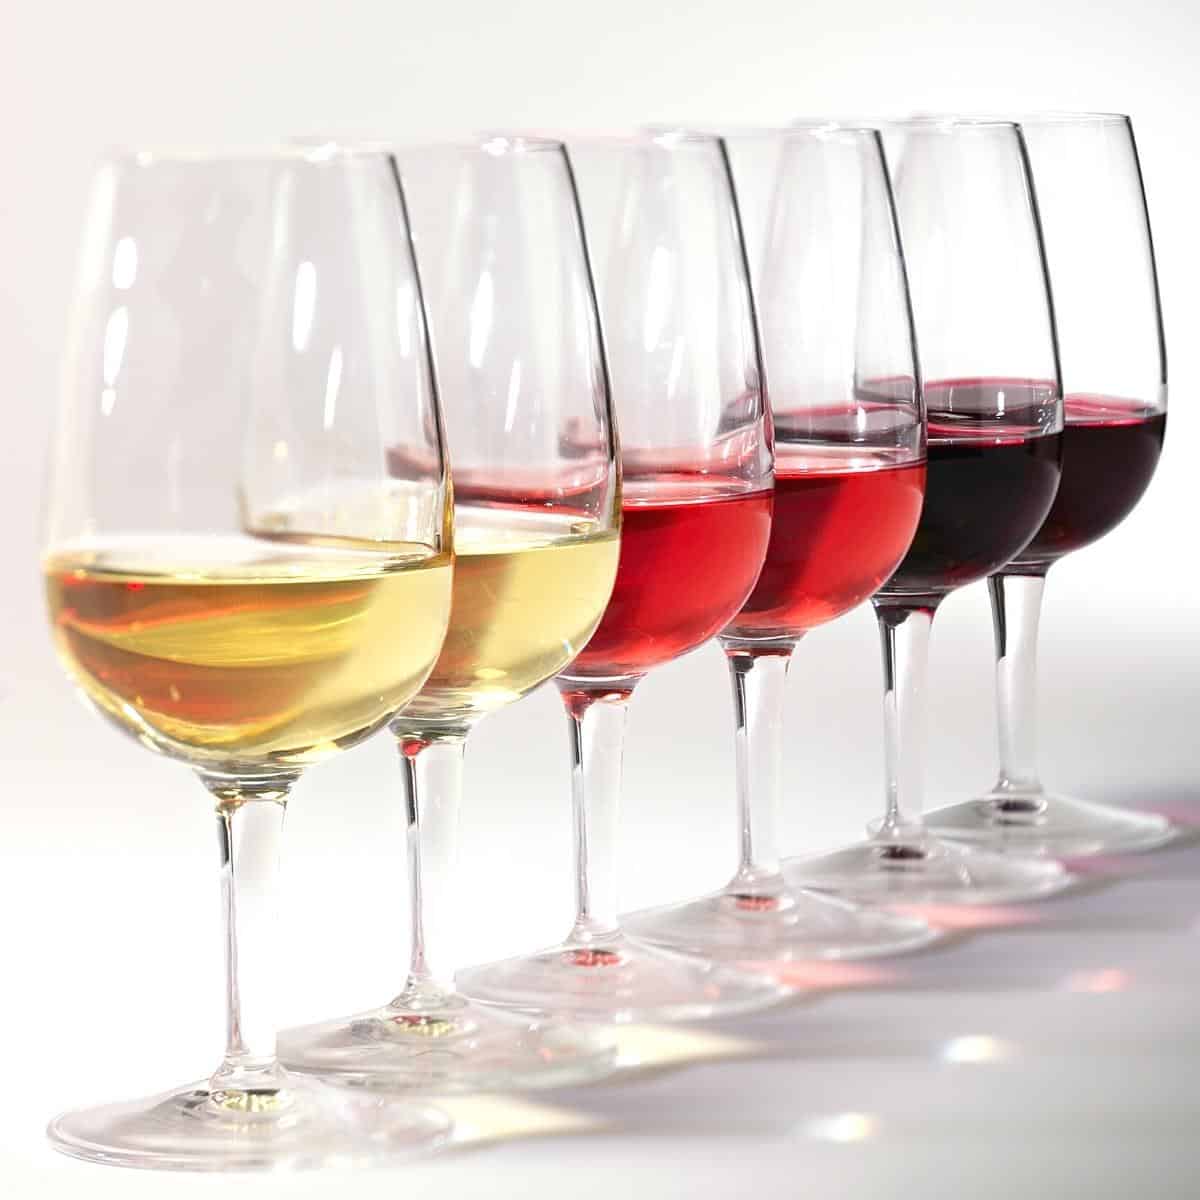 6 glasses of wine varrying from white to red